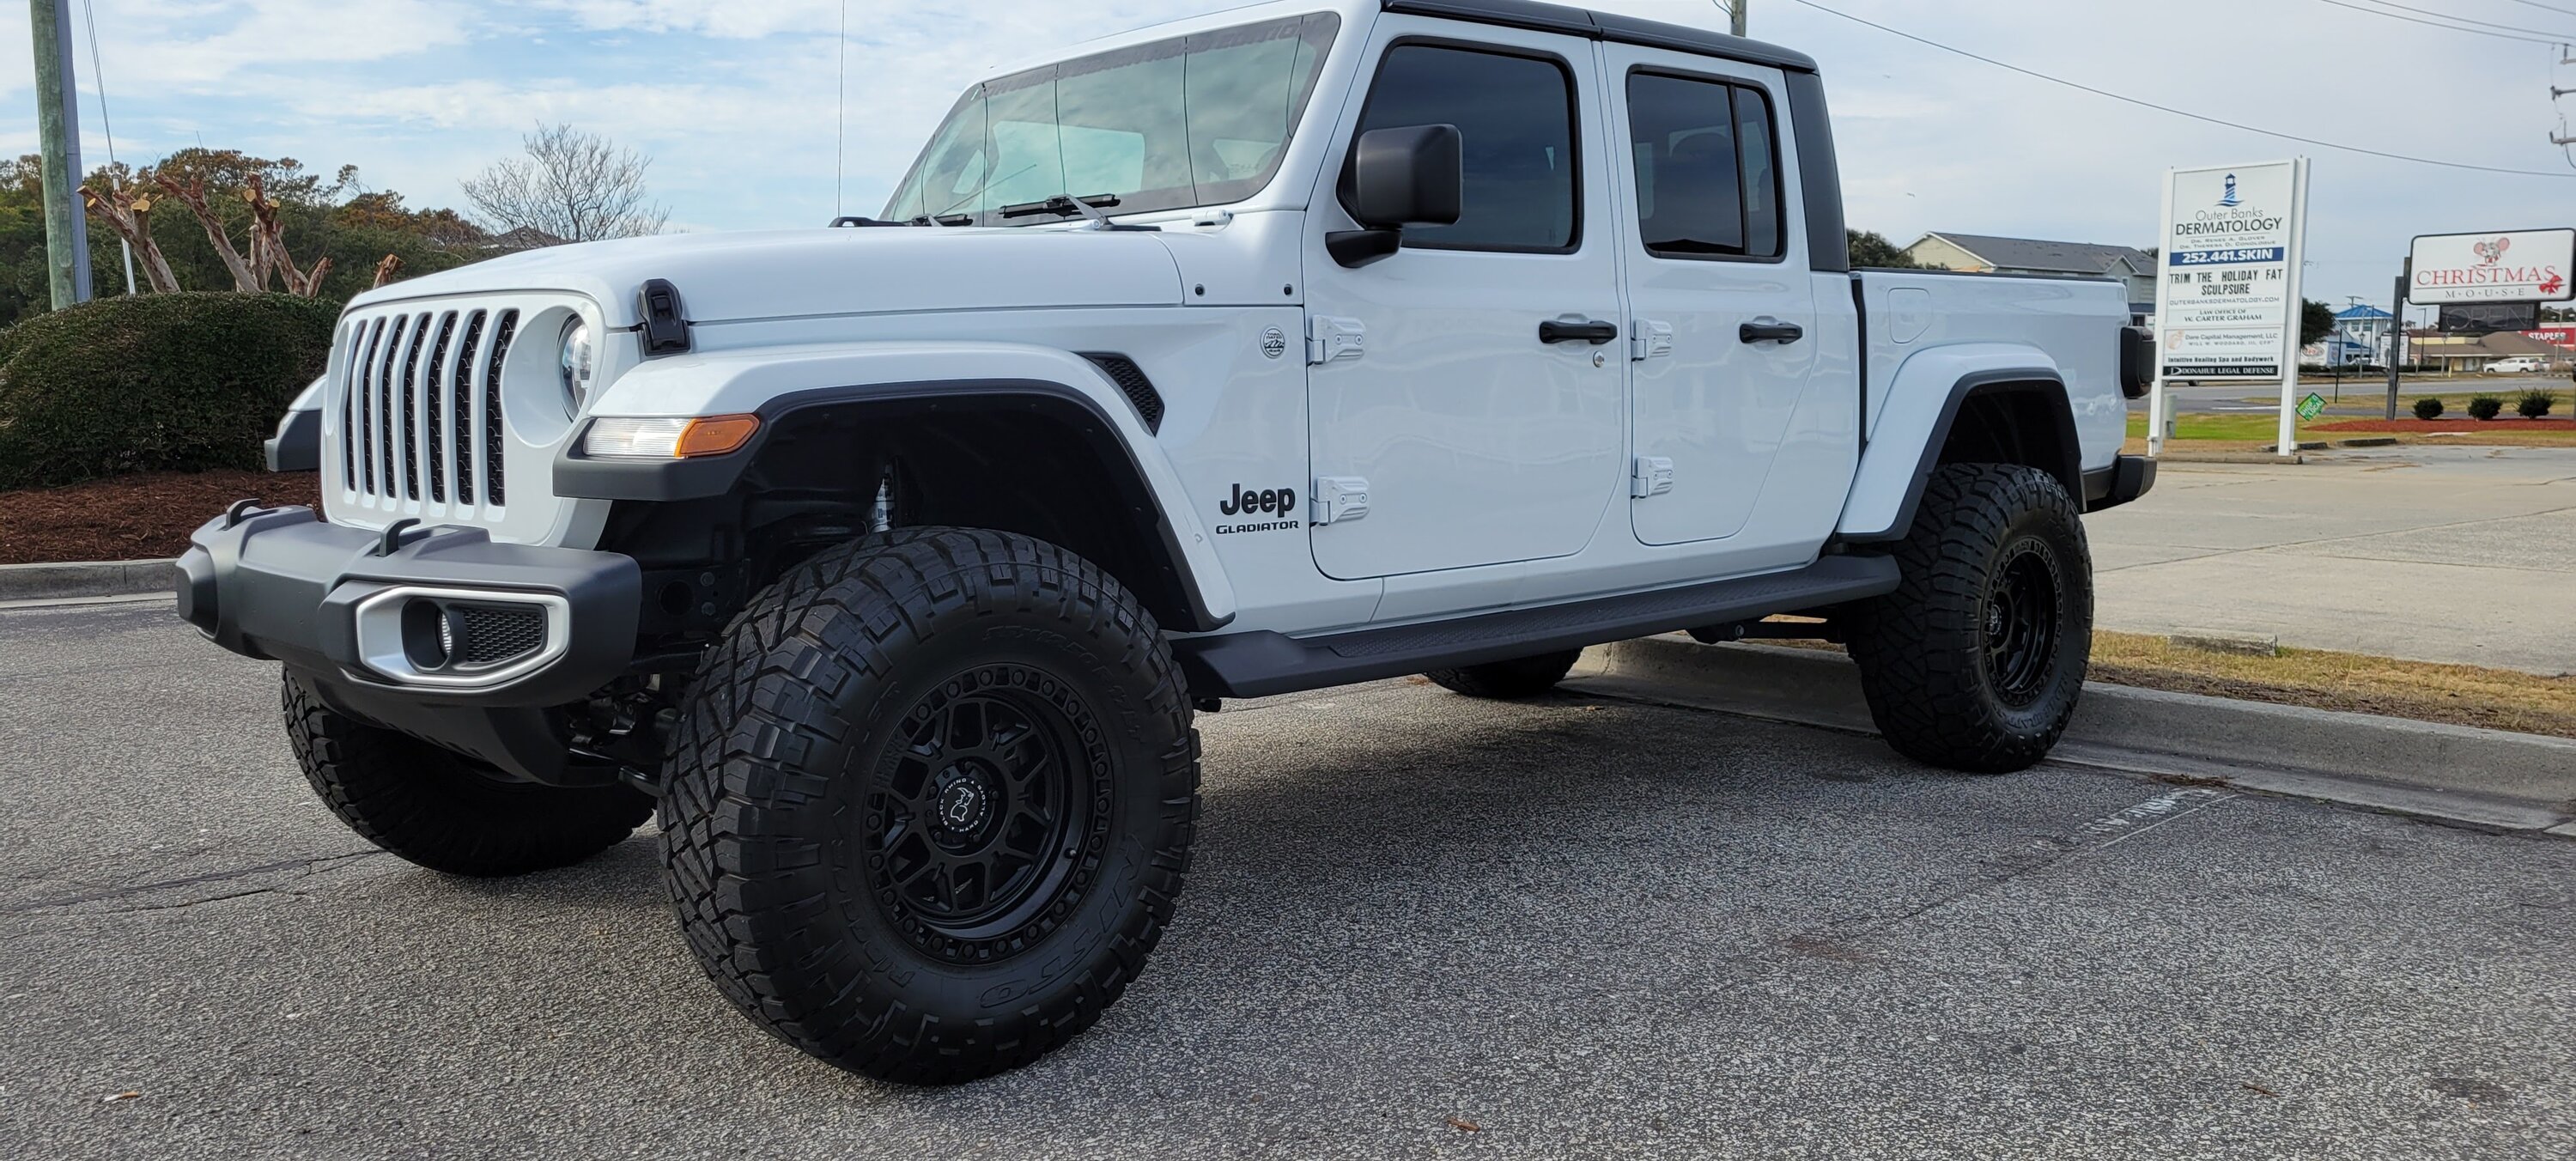 Jeep Gladiator Got the Mopar 2" lift, love it but.... need your wheels pics now 20211204_130944